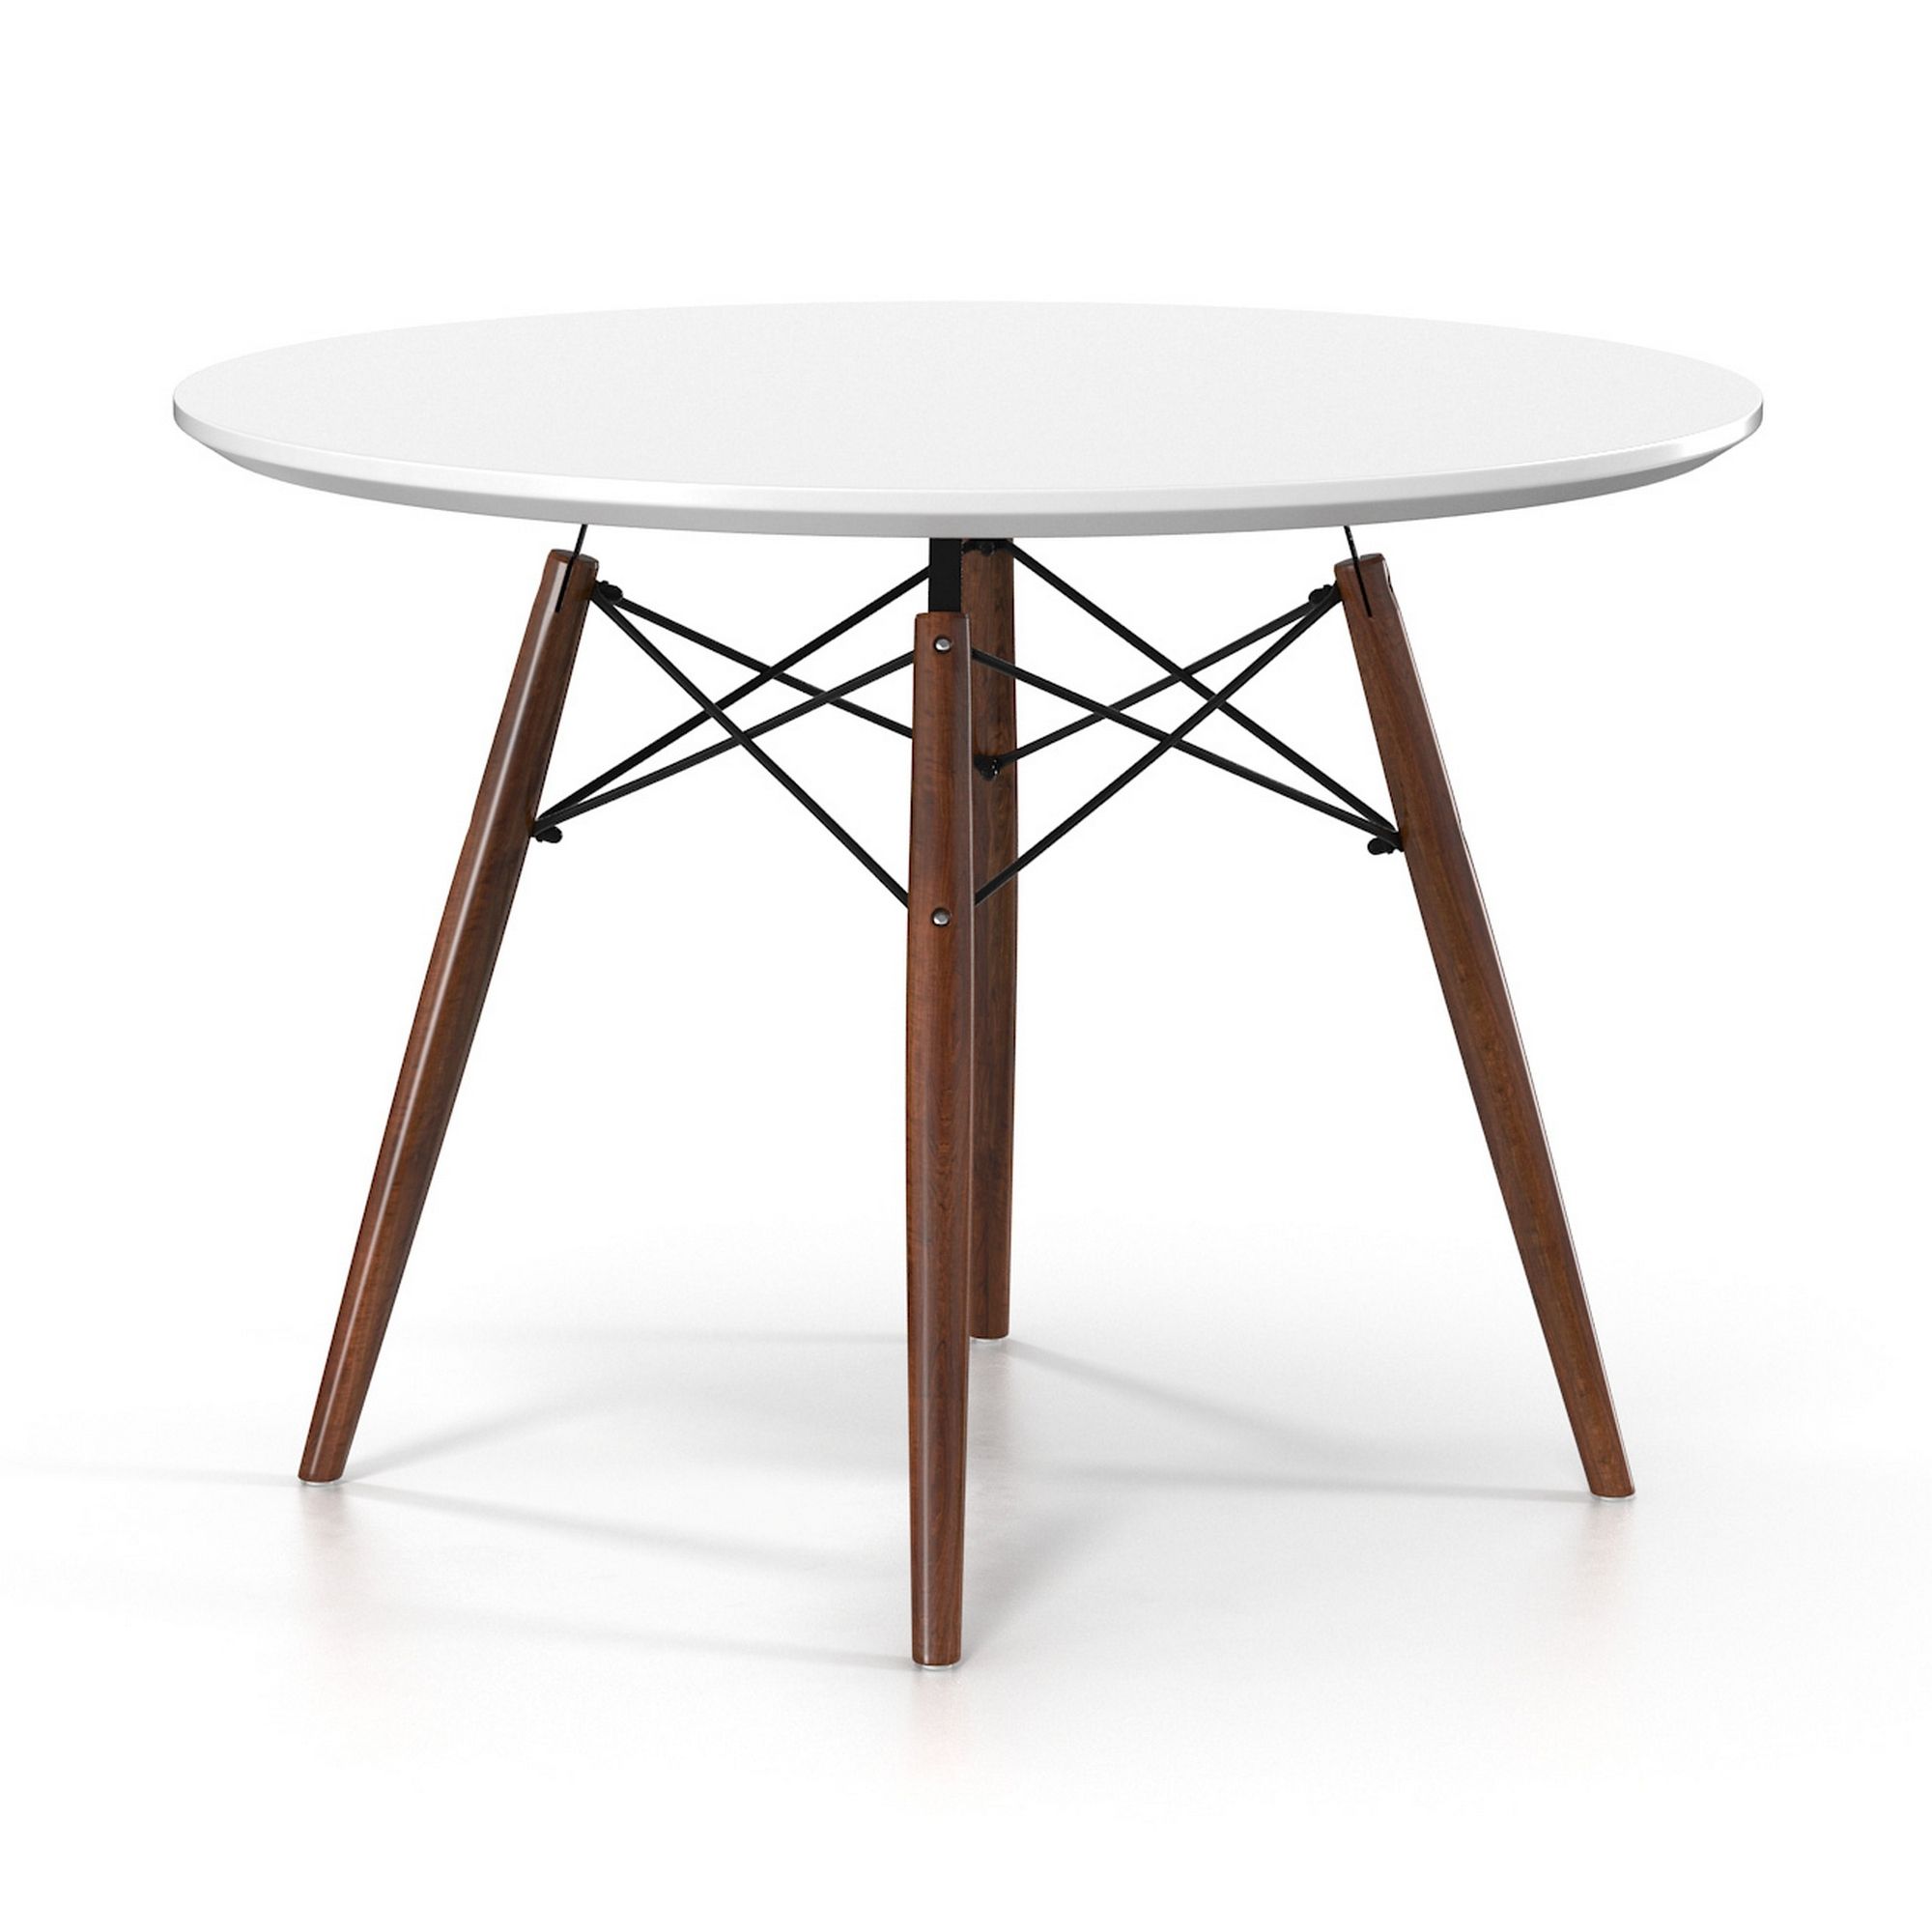 Balfour 39'' Dining Tables Within Widely Used Parisian 39 Dining Table In White/walnut Stain (View 13 of 20)